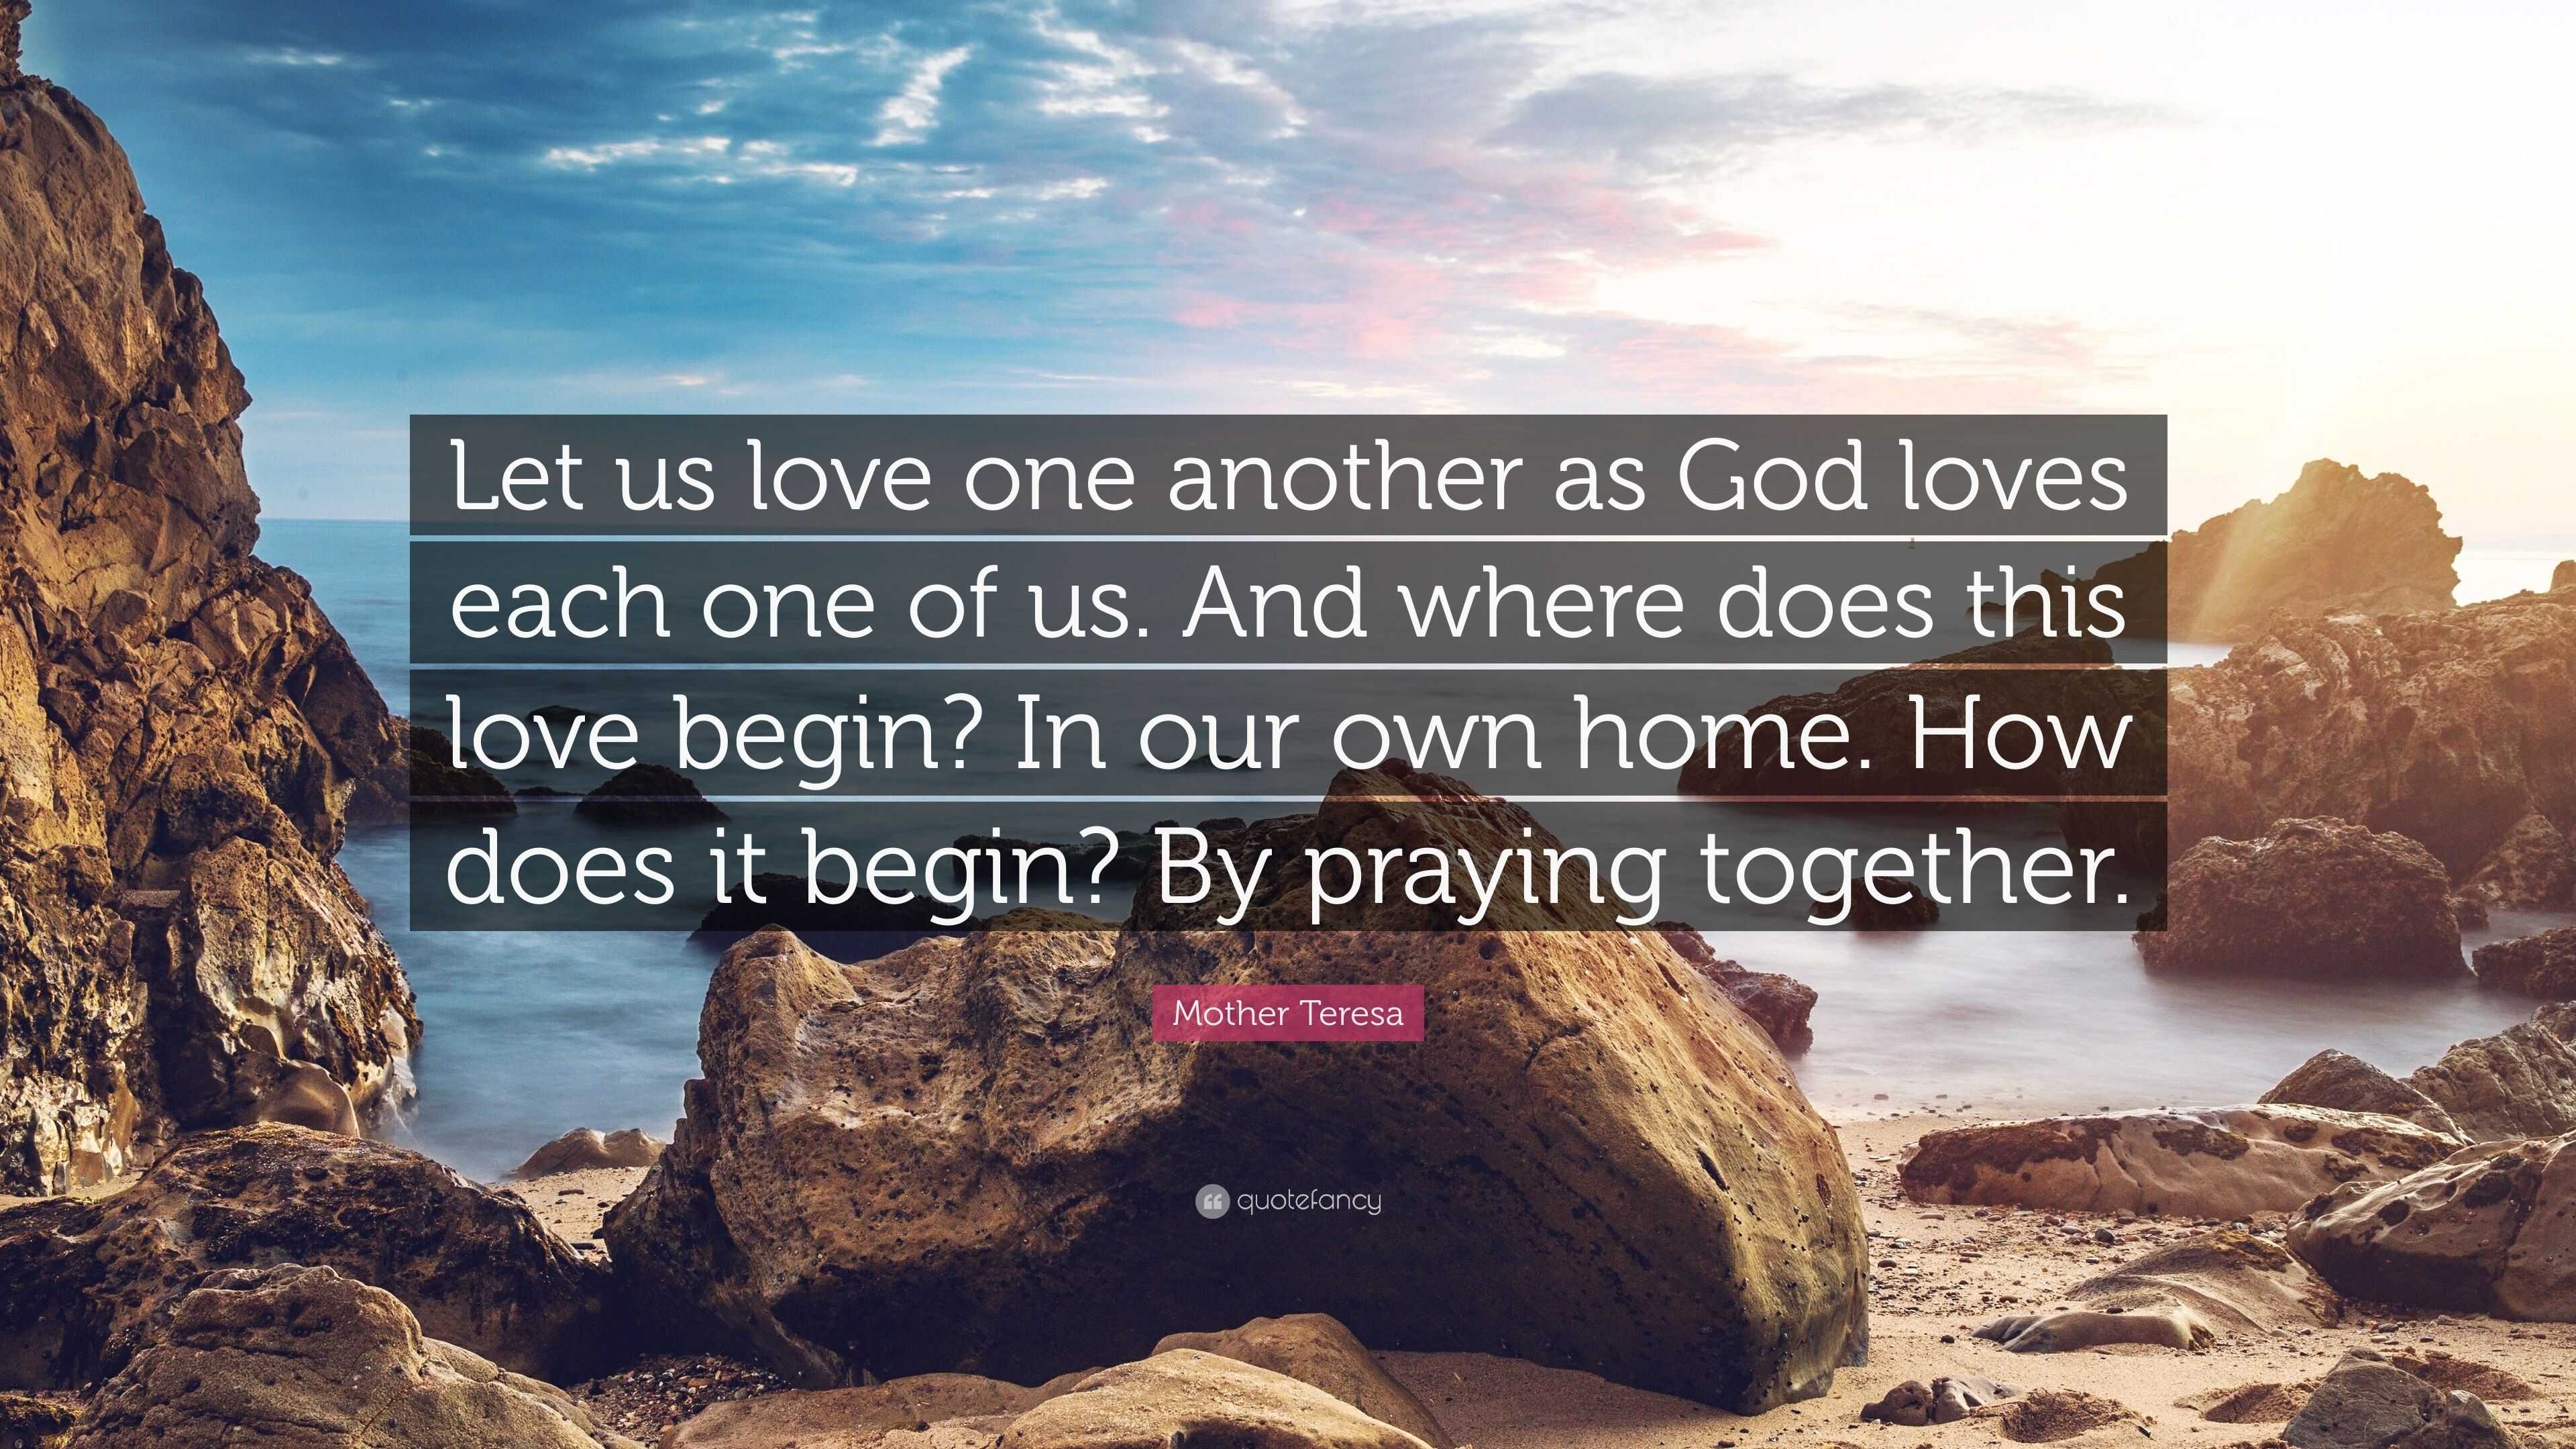 Mother Teresa Quote Let us love one another as God loves each